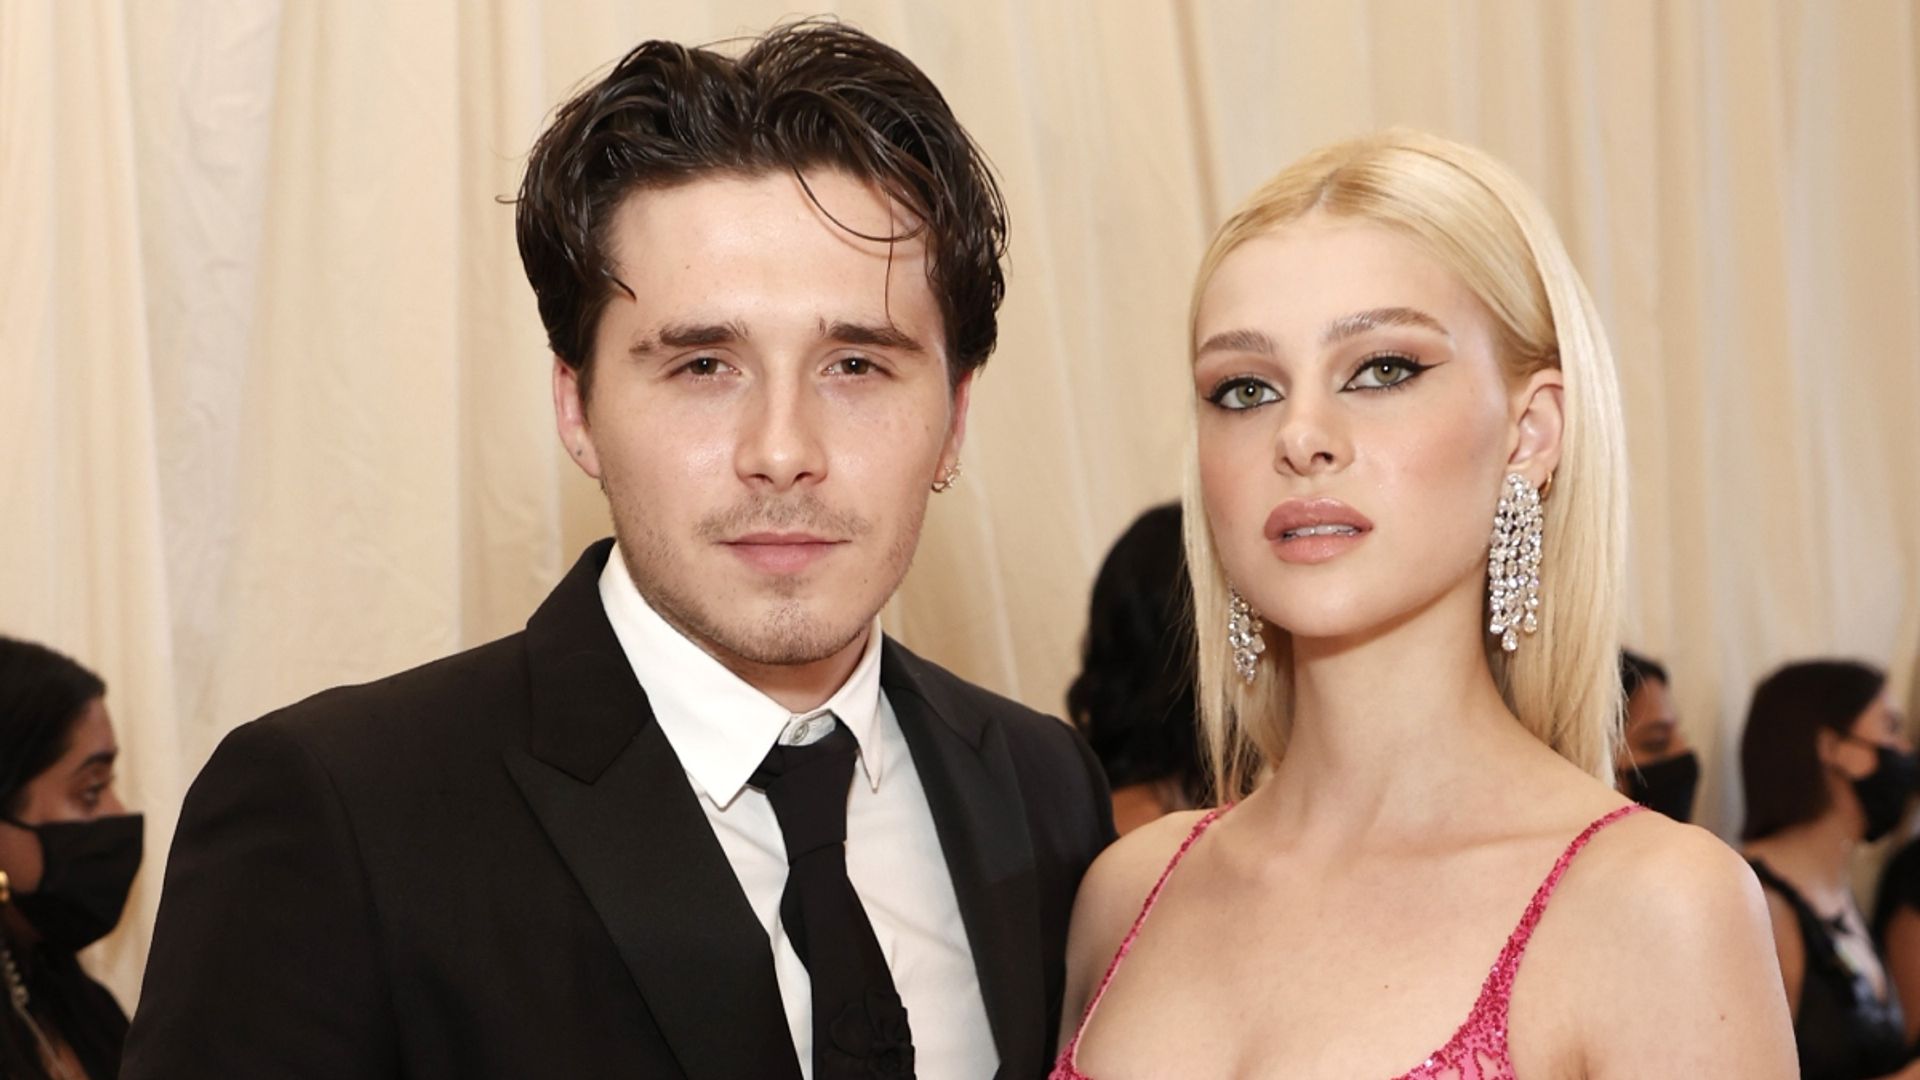 Brooklyn Beckham and Nicola Peltz dazzle the Met Gala carpet with their incredible looks